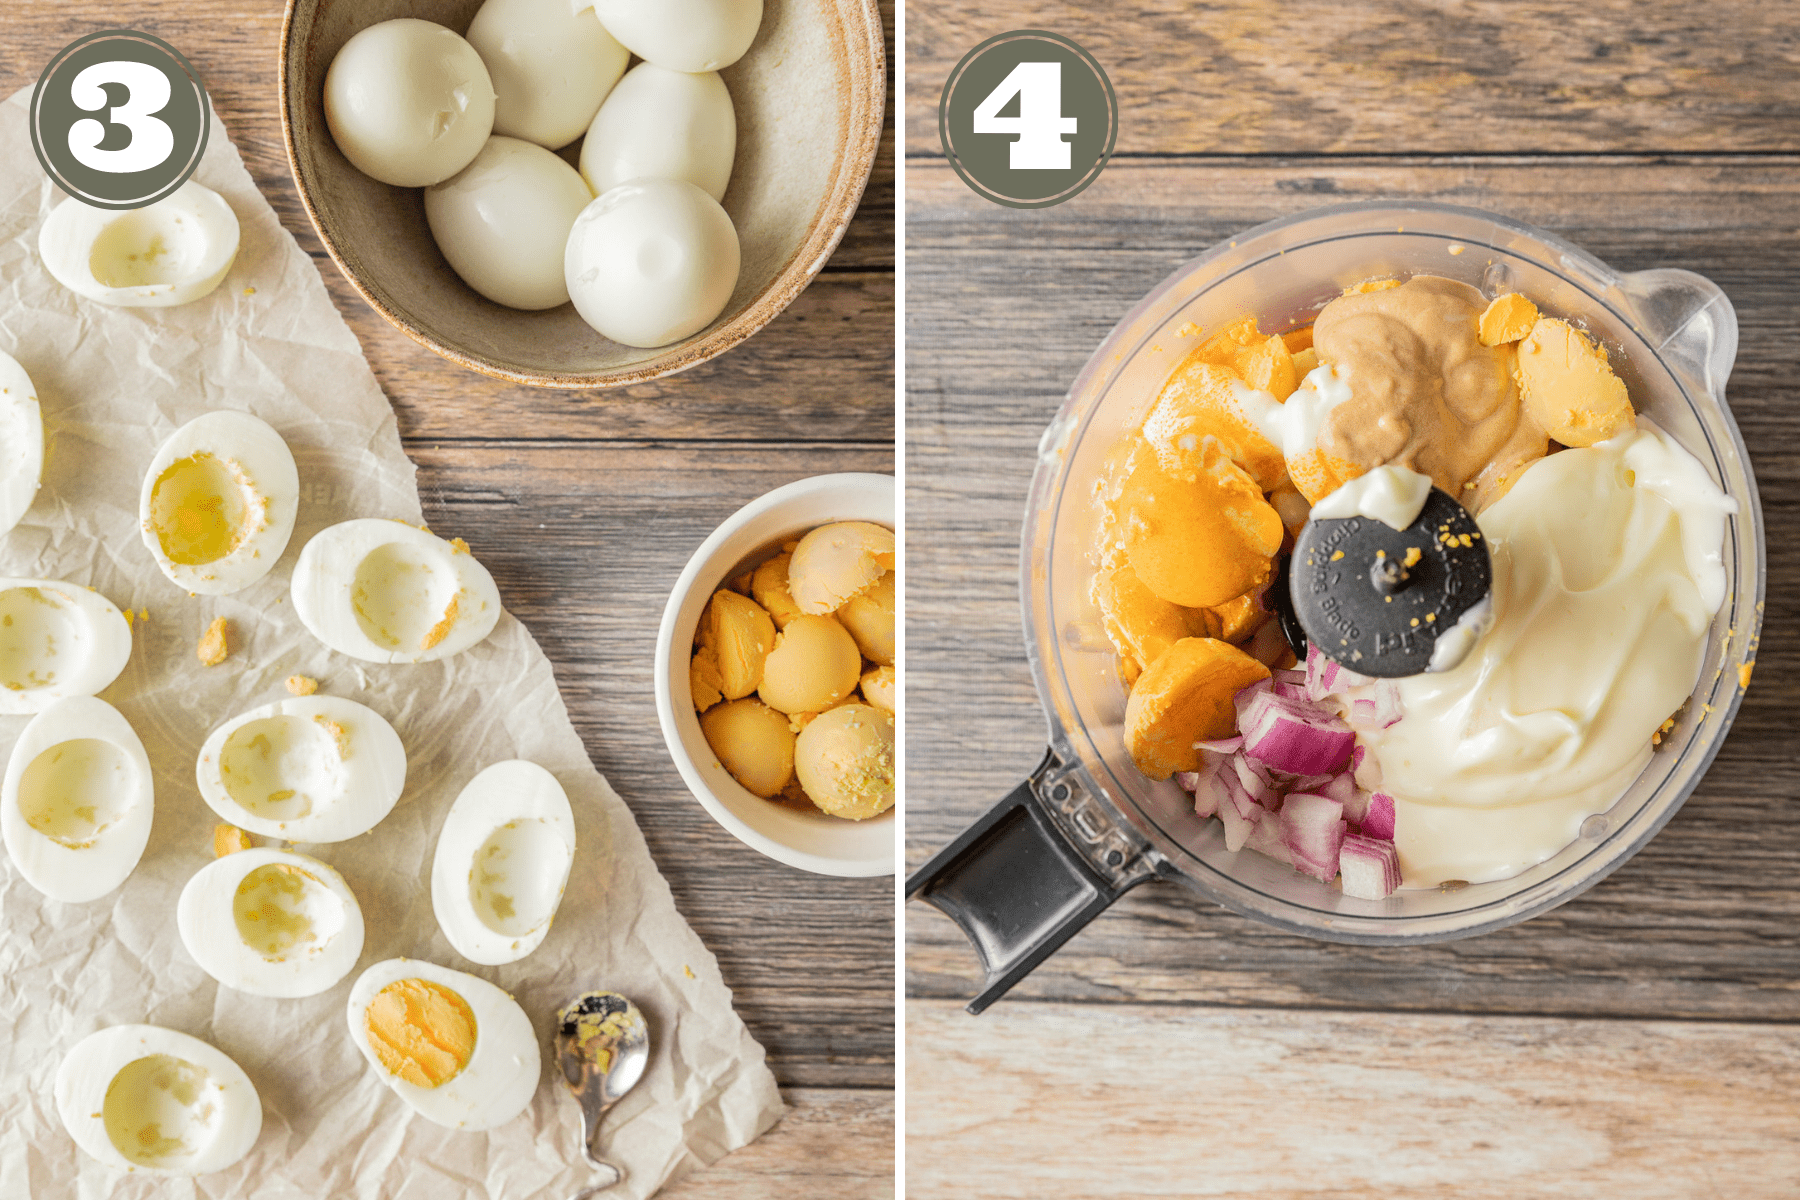 Side by side photos including halved hard boiled eggs and deviled eggs filling ingredients in a food processor. 